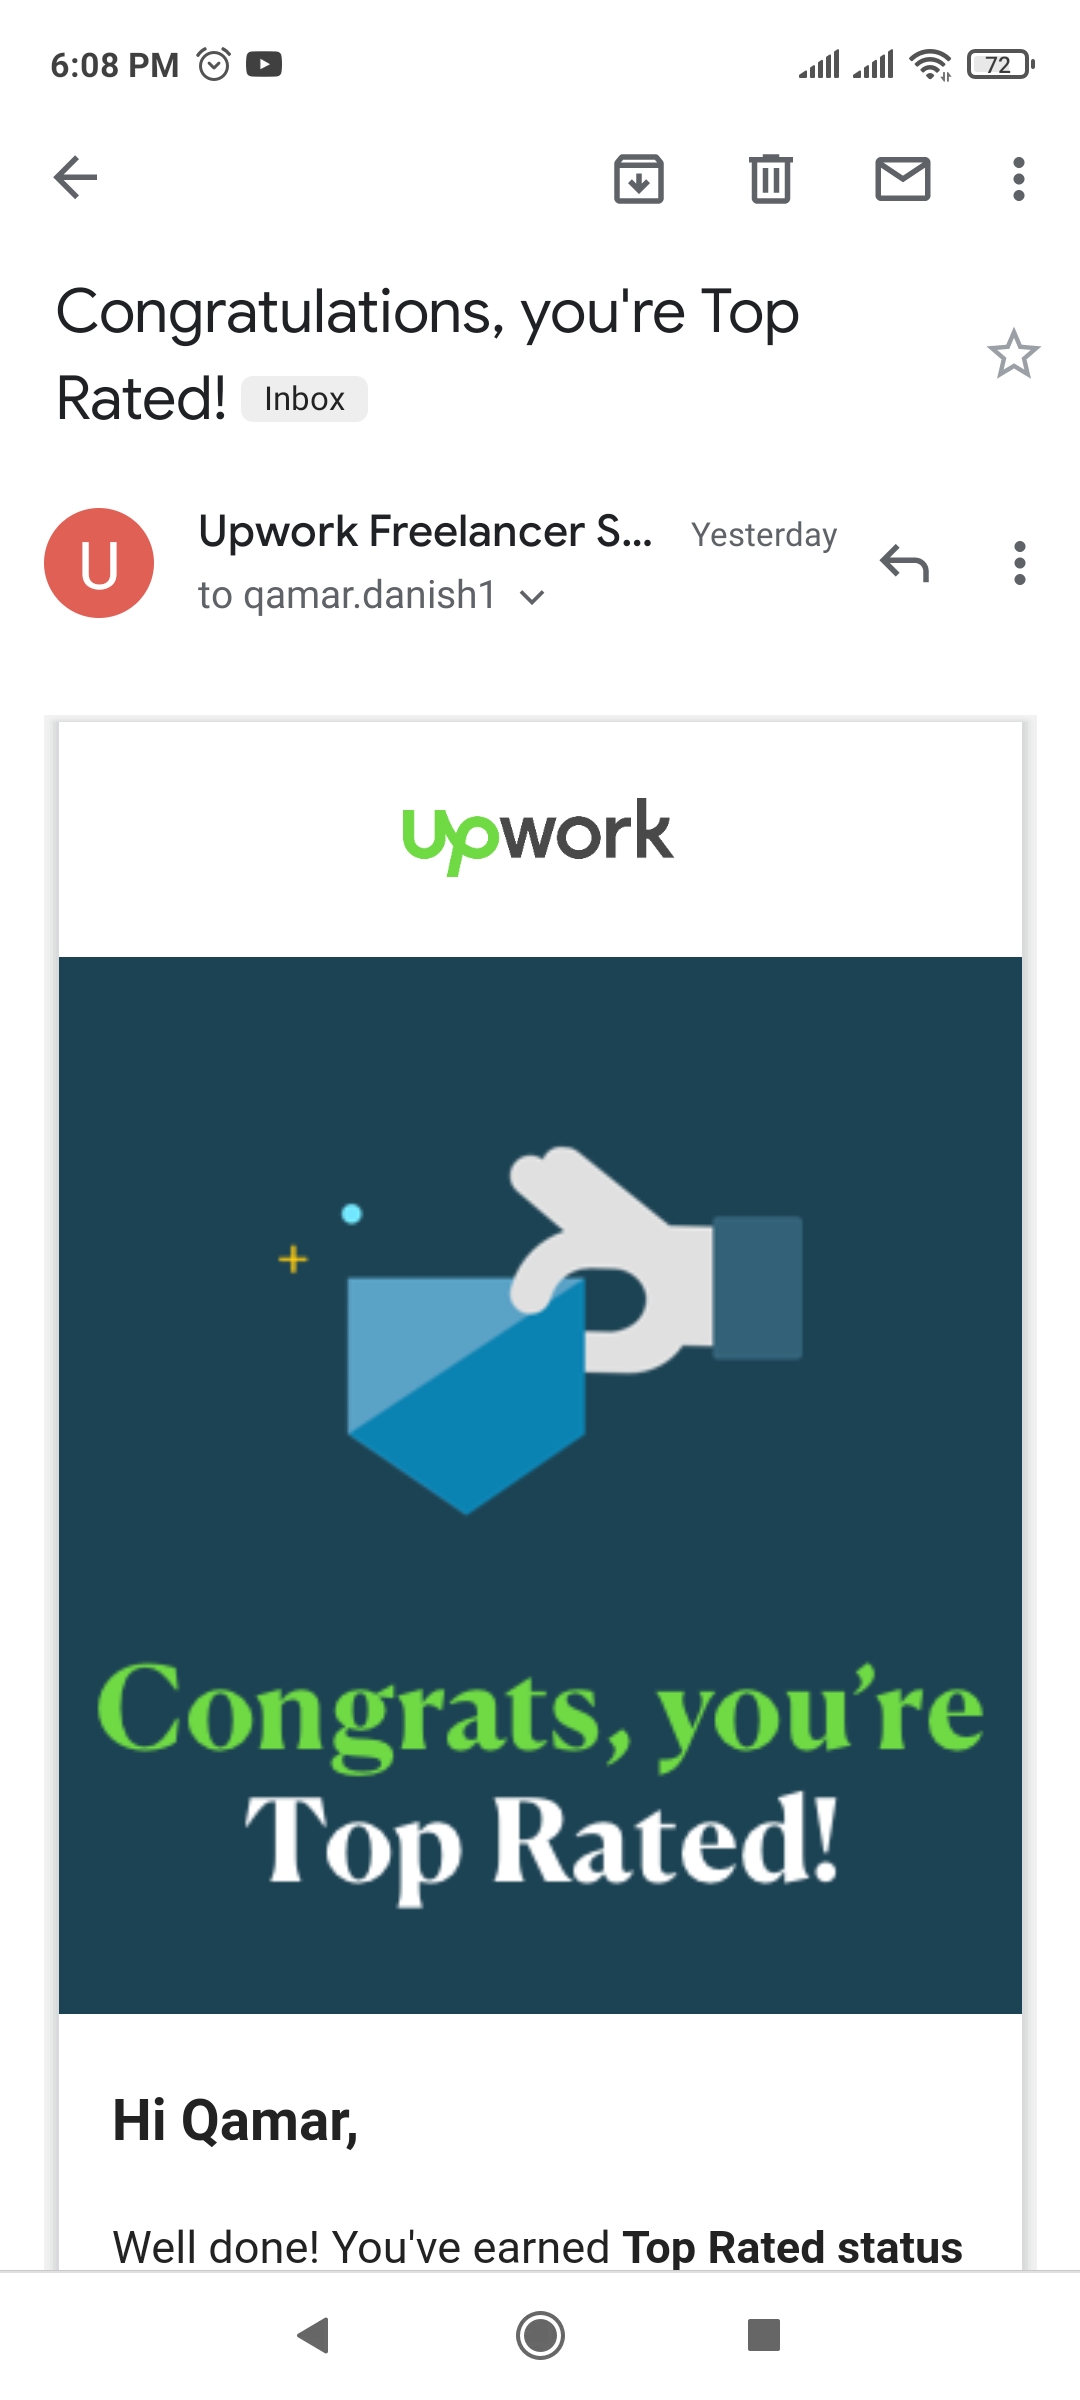 Top rated badge disappeared - Upwork Community